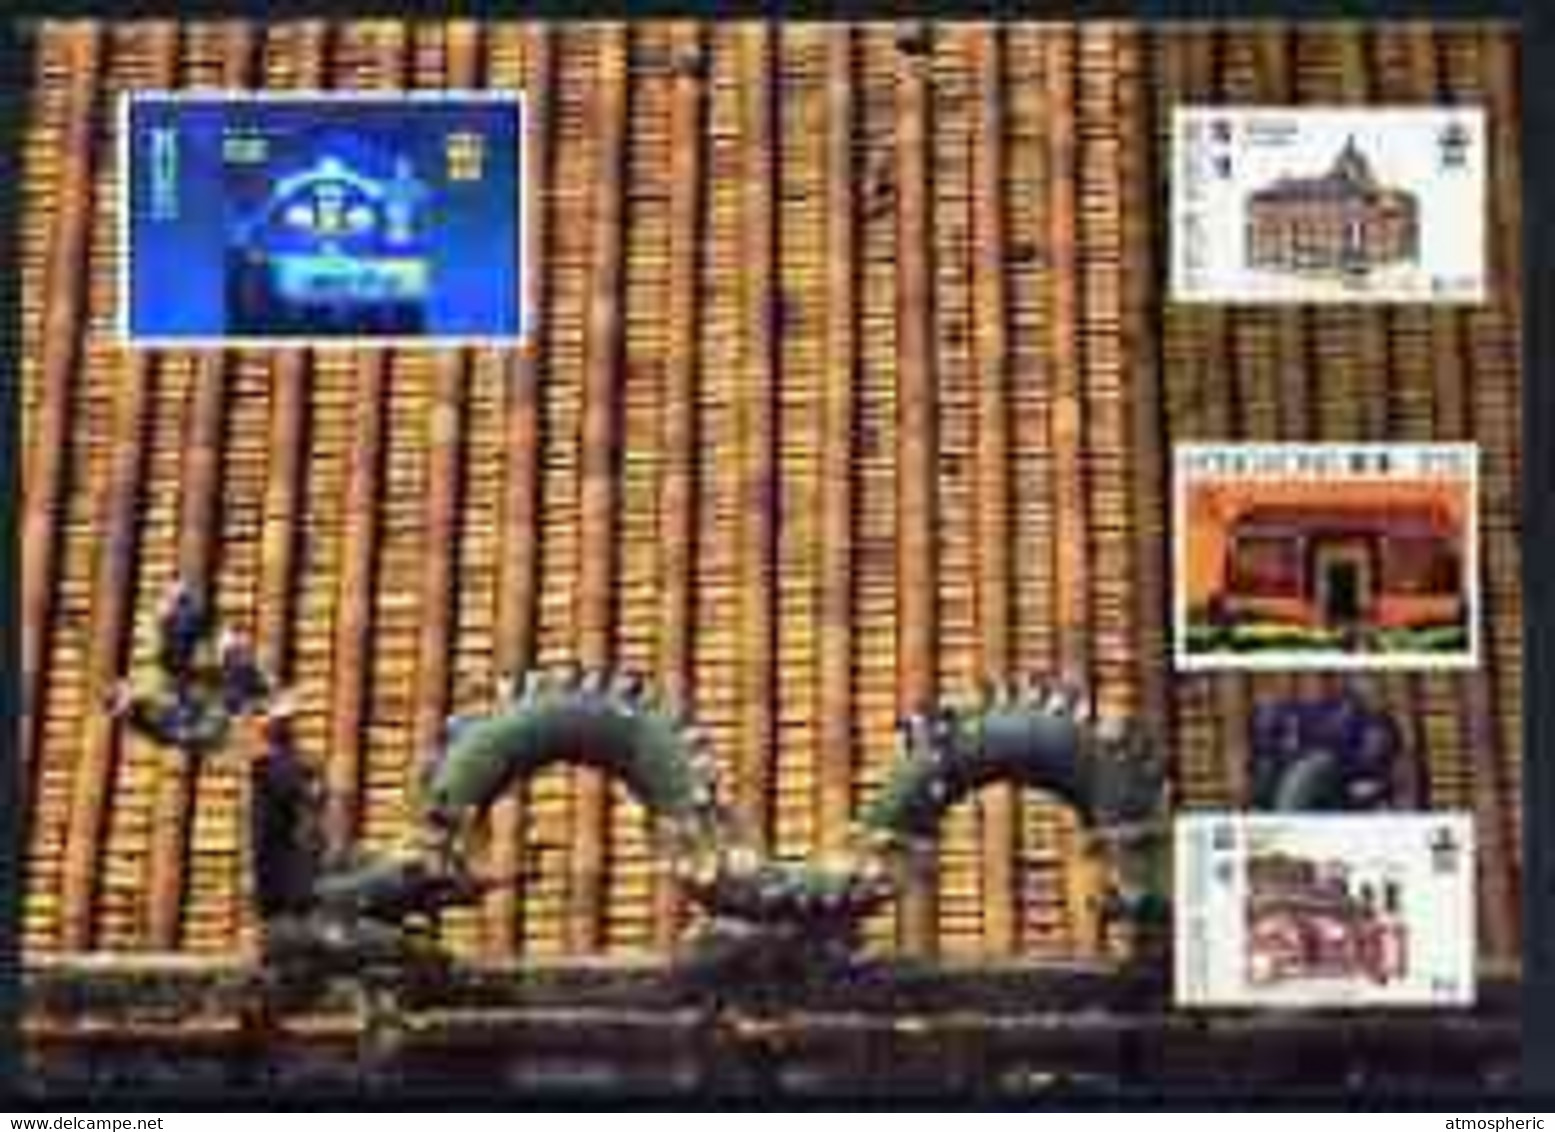 Hong Kong 1996 Hong Kong '97 Stamp Exhibition Hologram Postcard No 6 (Wan Chai Post Office) Showing $5 Post Office Stamp - Lettres & Documents